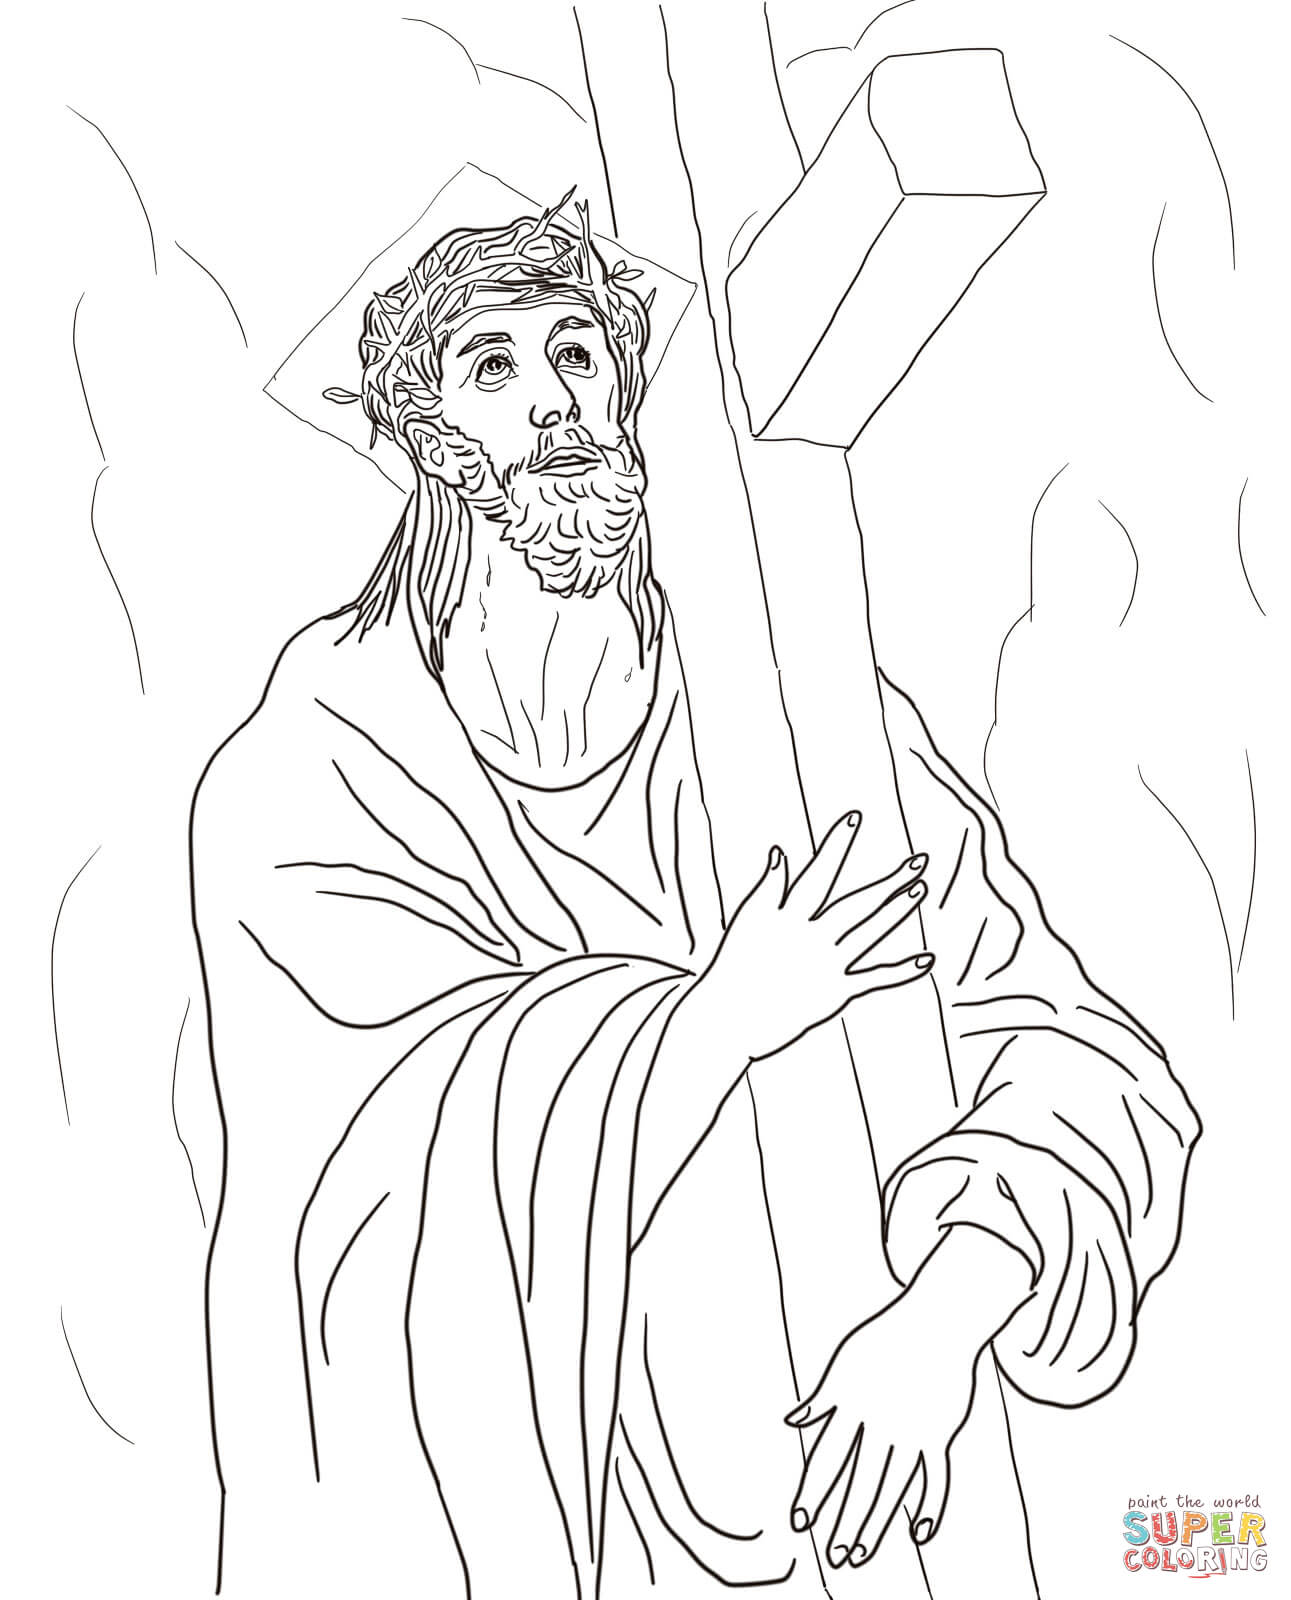 Stations Of The Cross coloring page | Free Printable Coloring Pages